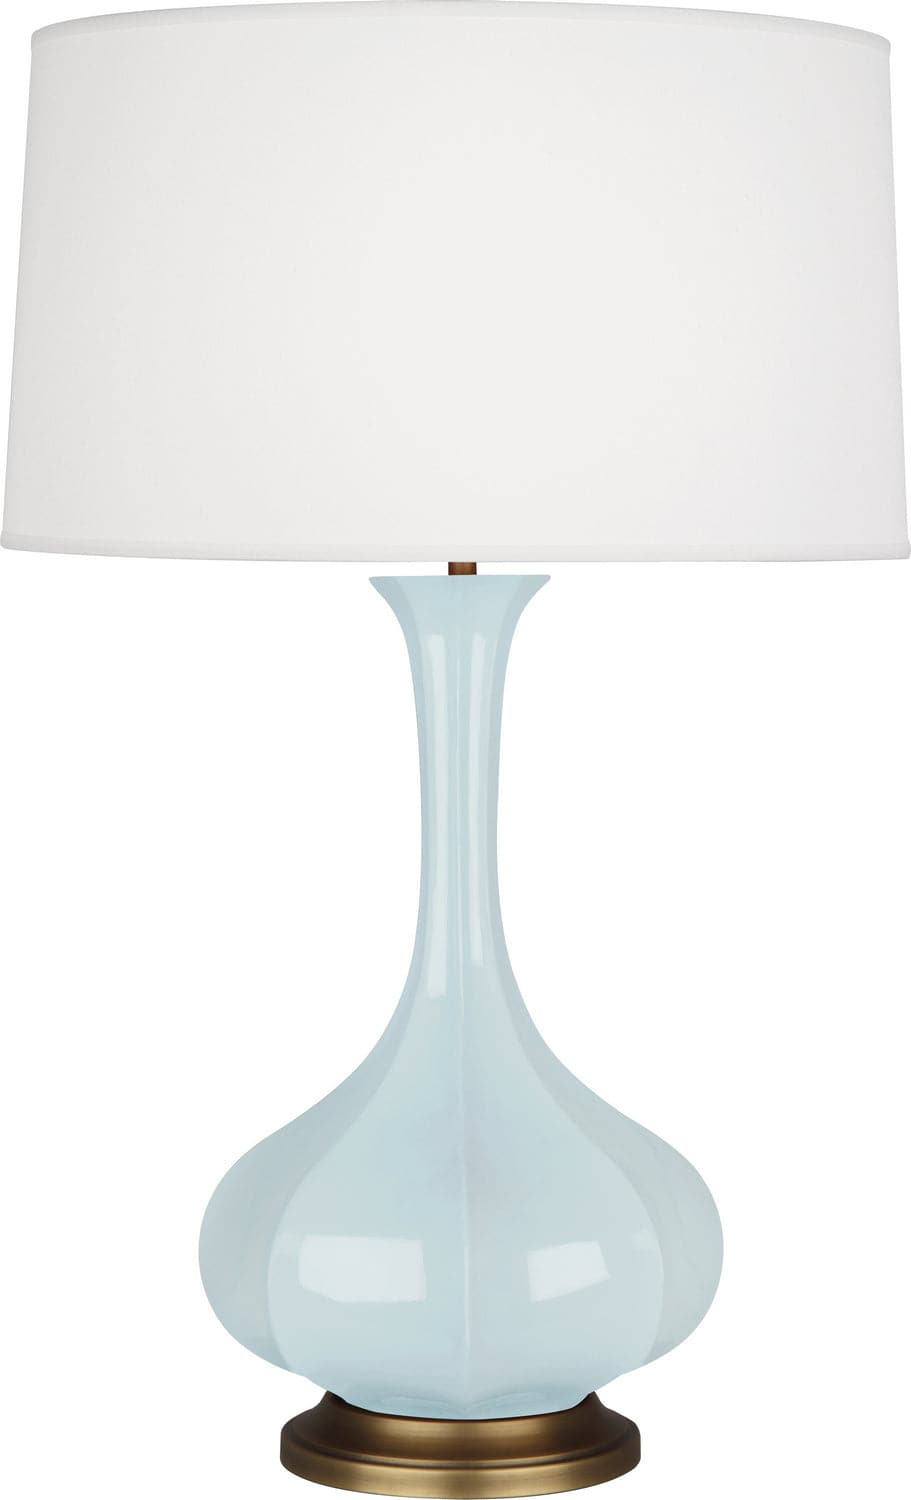 Robert Abbey - BB994 - One Light Table Lamp - Pike - Baby Blue Glazed